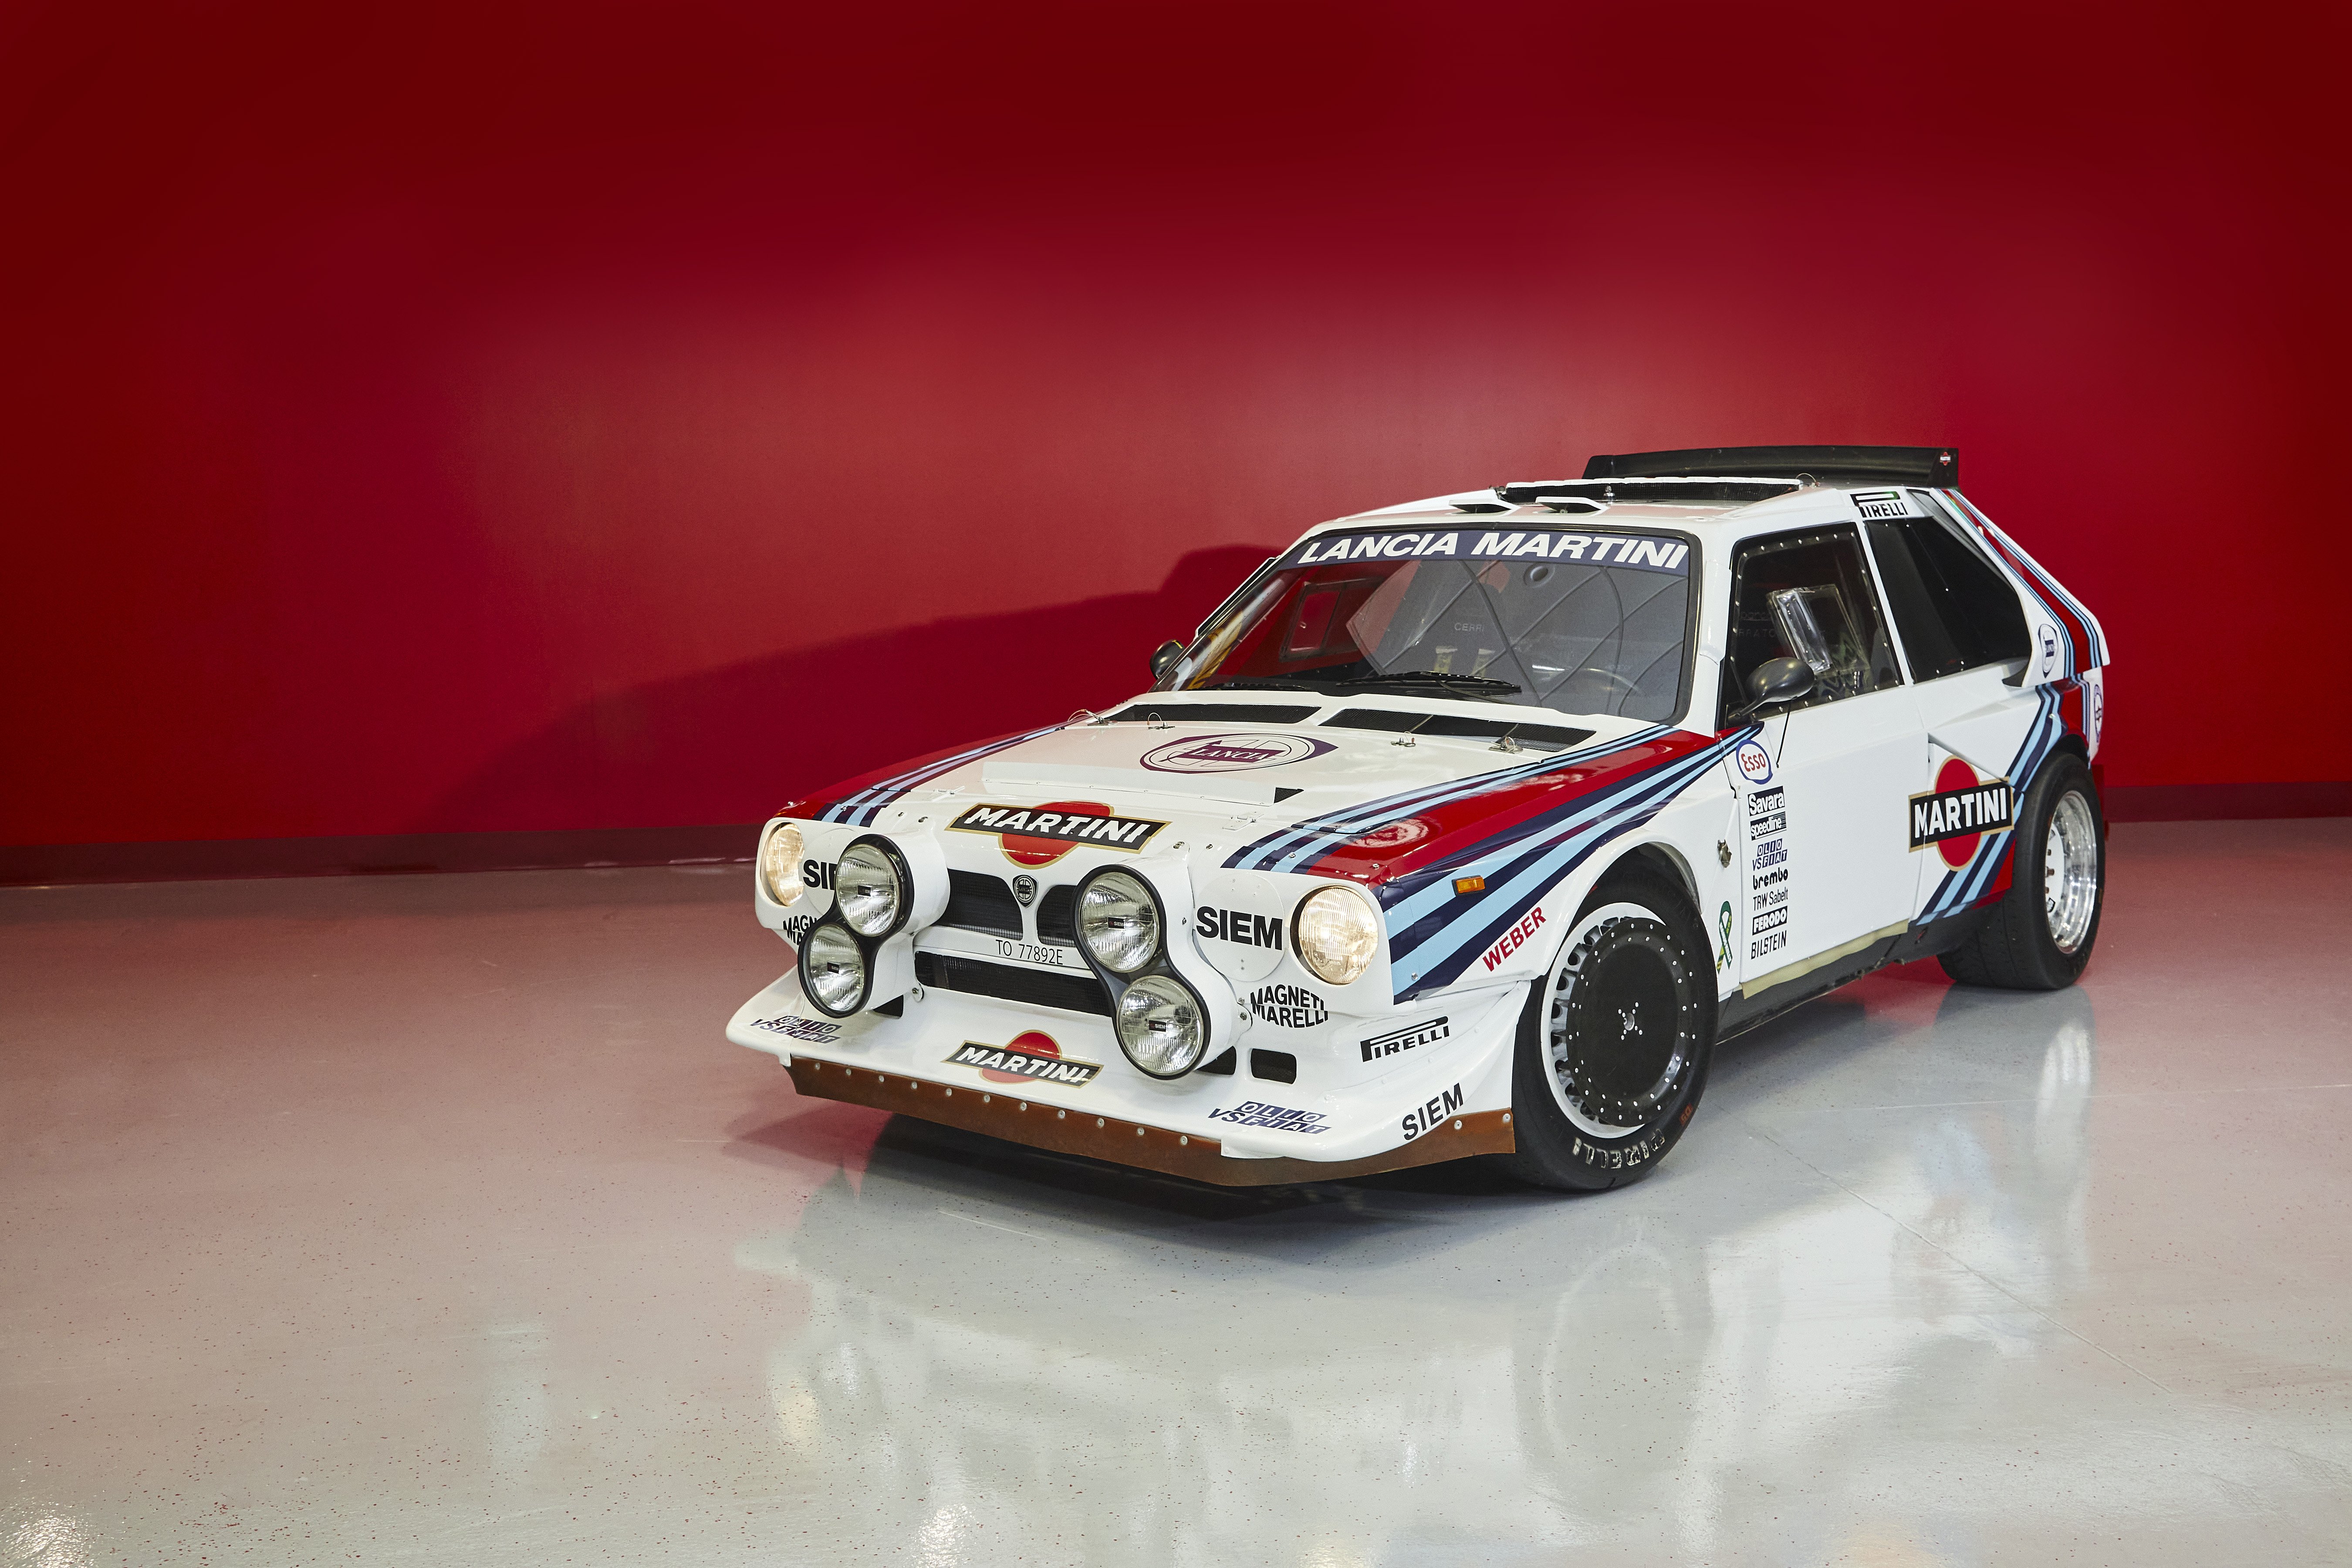 1985 Lancia Delta - S4 Corsa Group B - Works car and Abarth